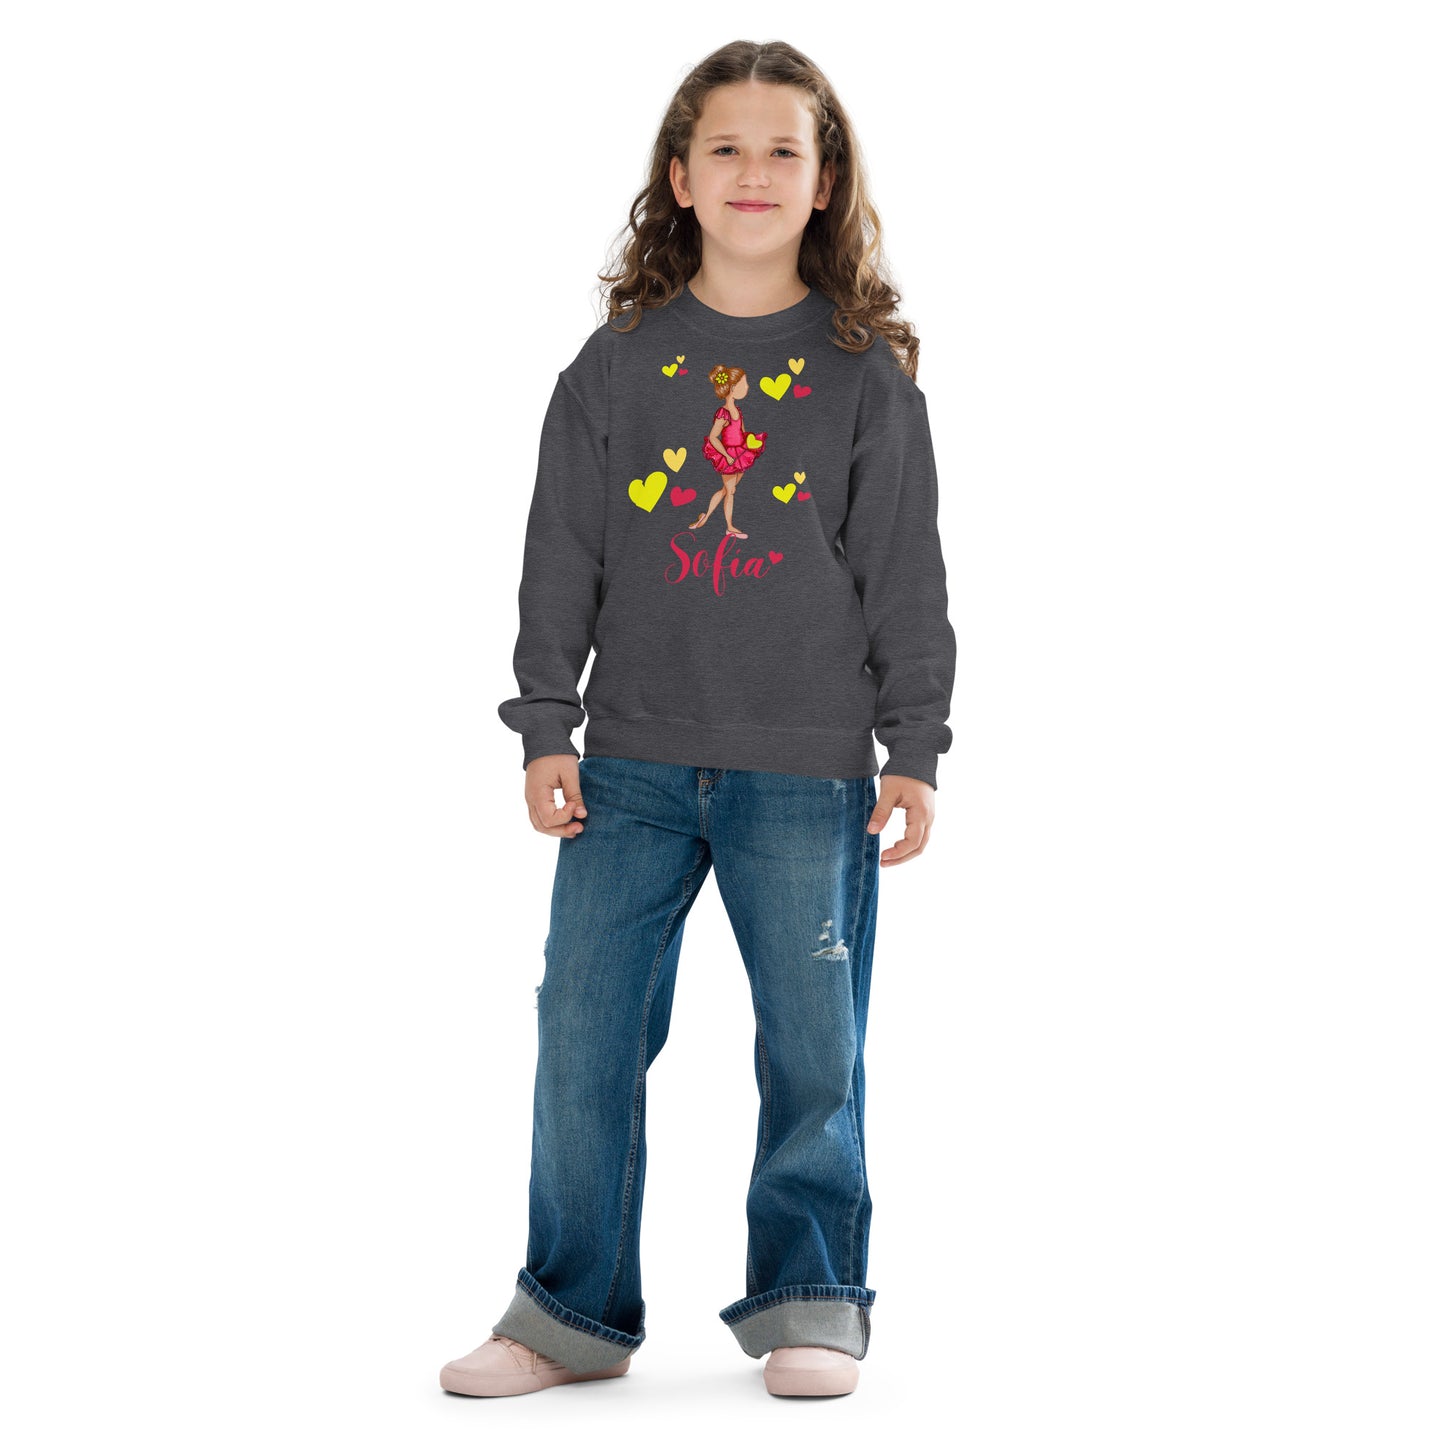 a young girl wearing a sweatshirt and jeans